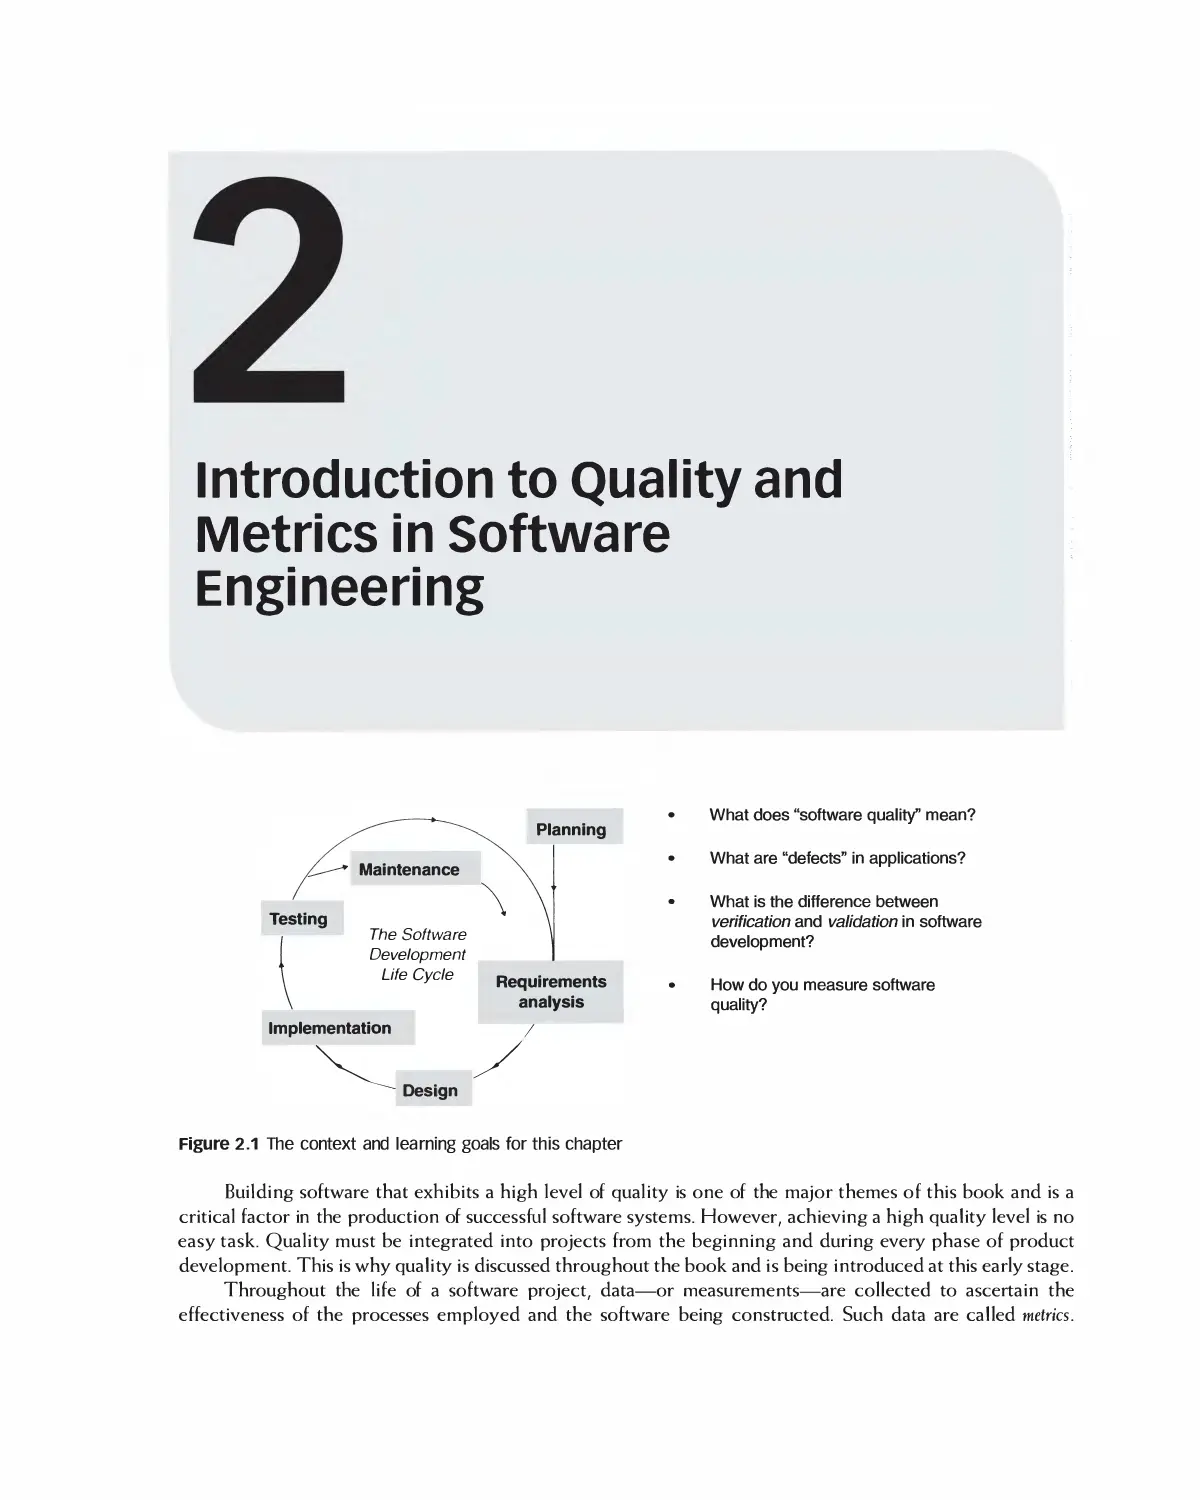 Chapter 2: Introduction to Quality and Metrics in Software Engineering